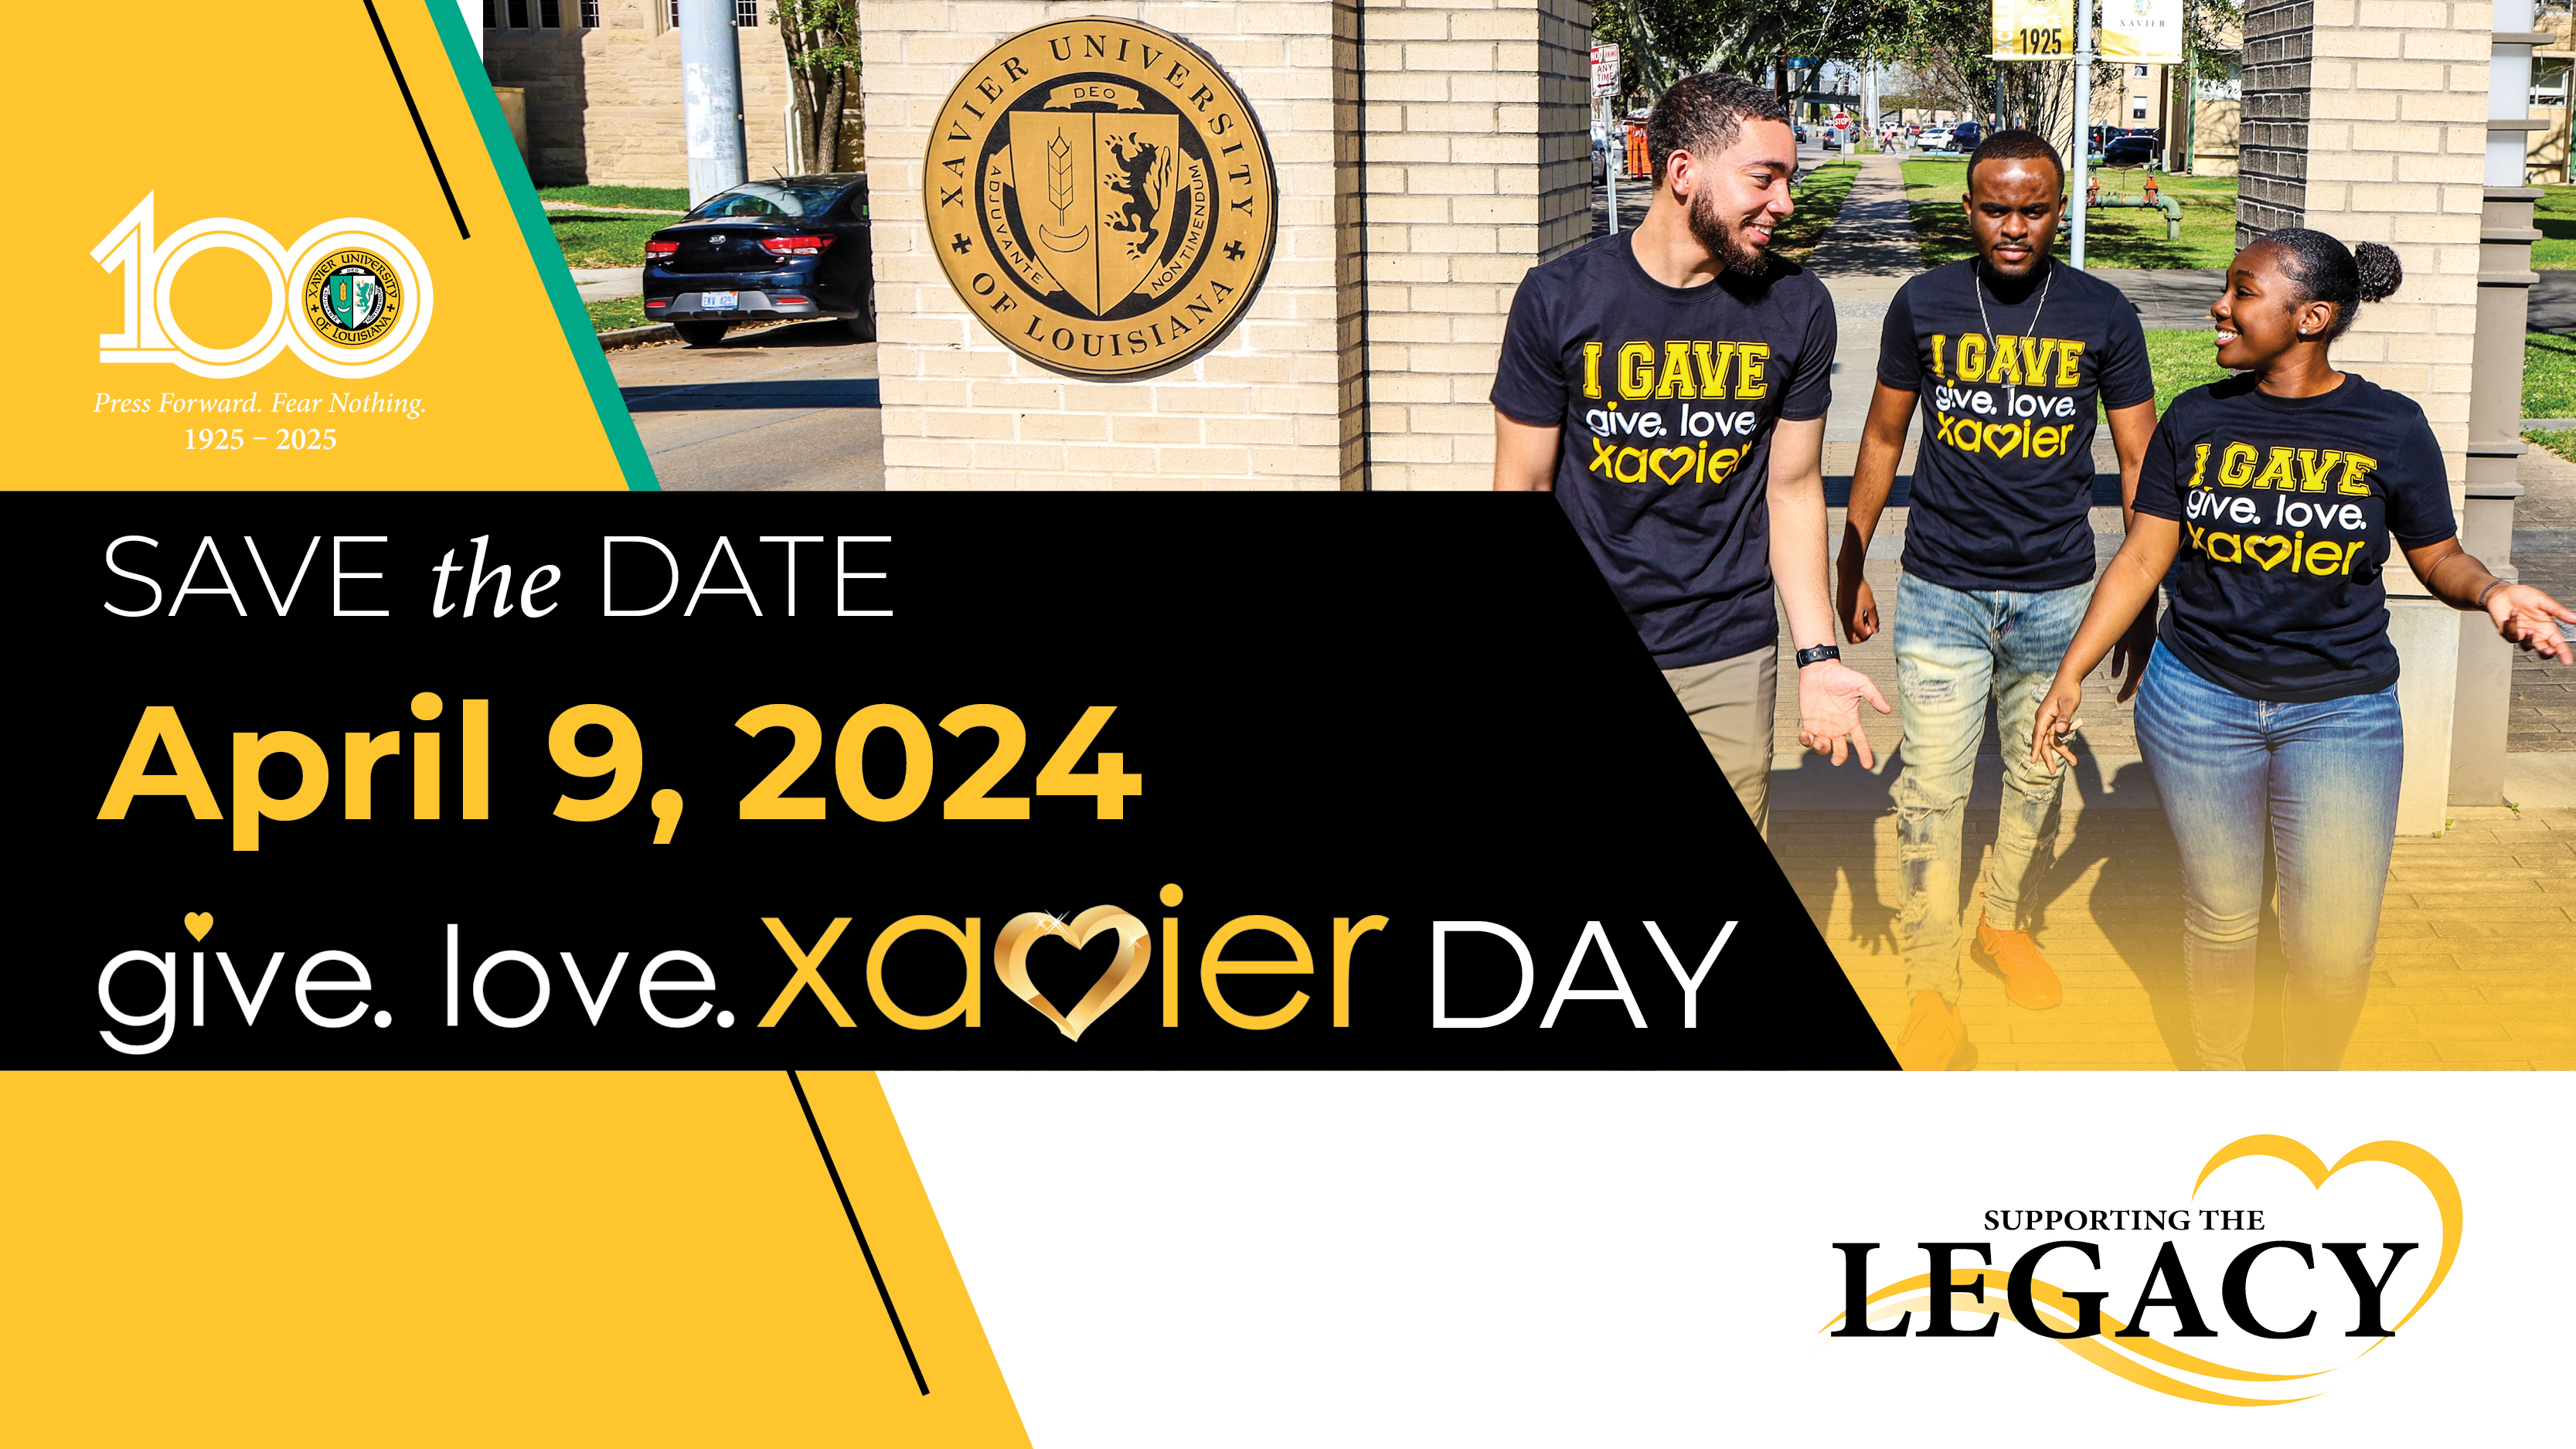 April 9, 2024 - Join us for Give. Love. Xavier Day